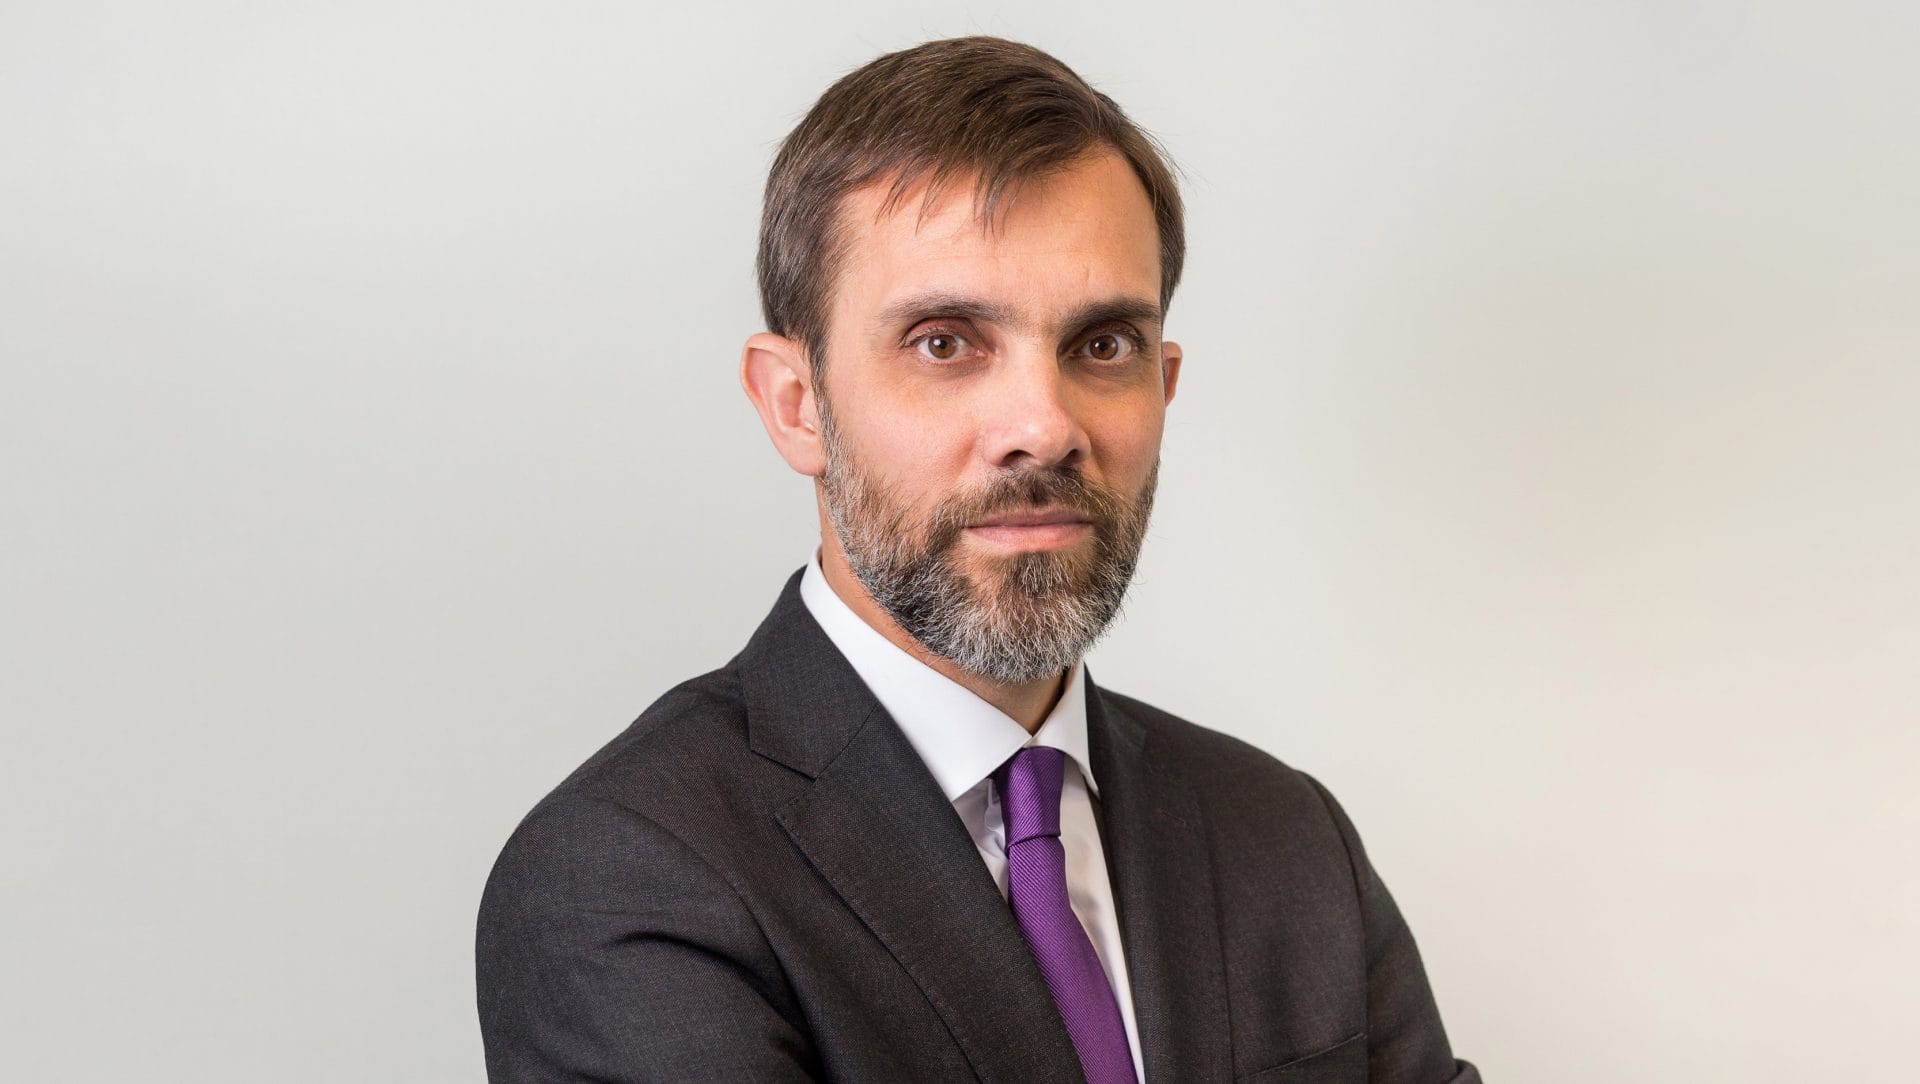 Carlos Cerezo, Chief Human Resources Officer of Ferrovial